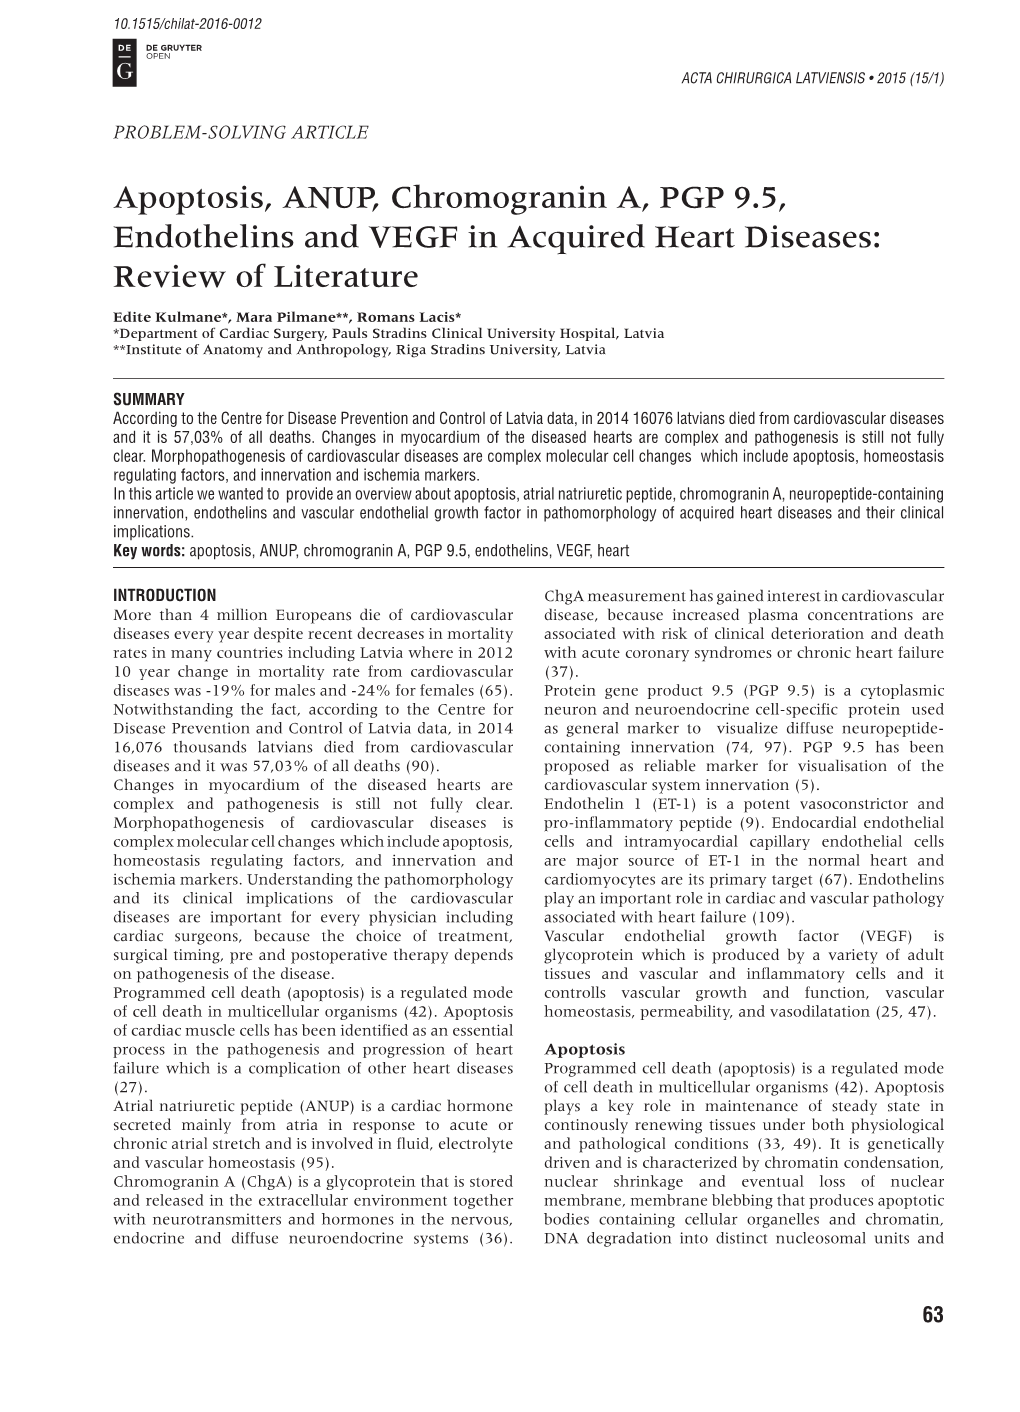 Apoptosis, ANUP, Chromogranin A, PGP 9.5, Endothelins and VEGF in Acquired Heart Diseases: Review of Literature